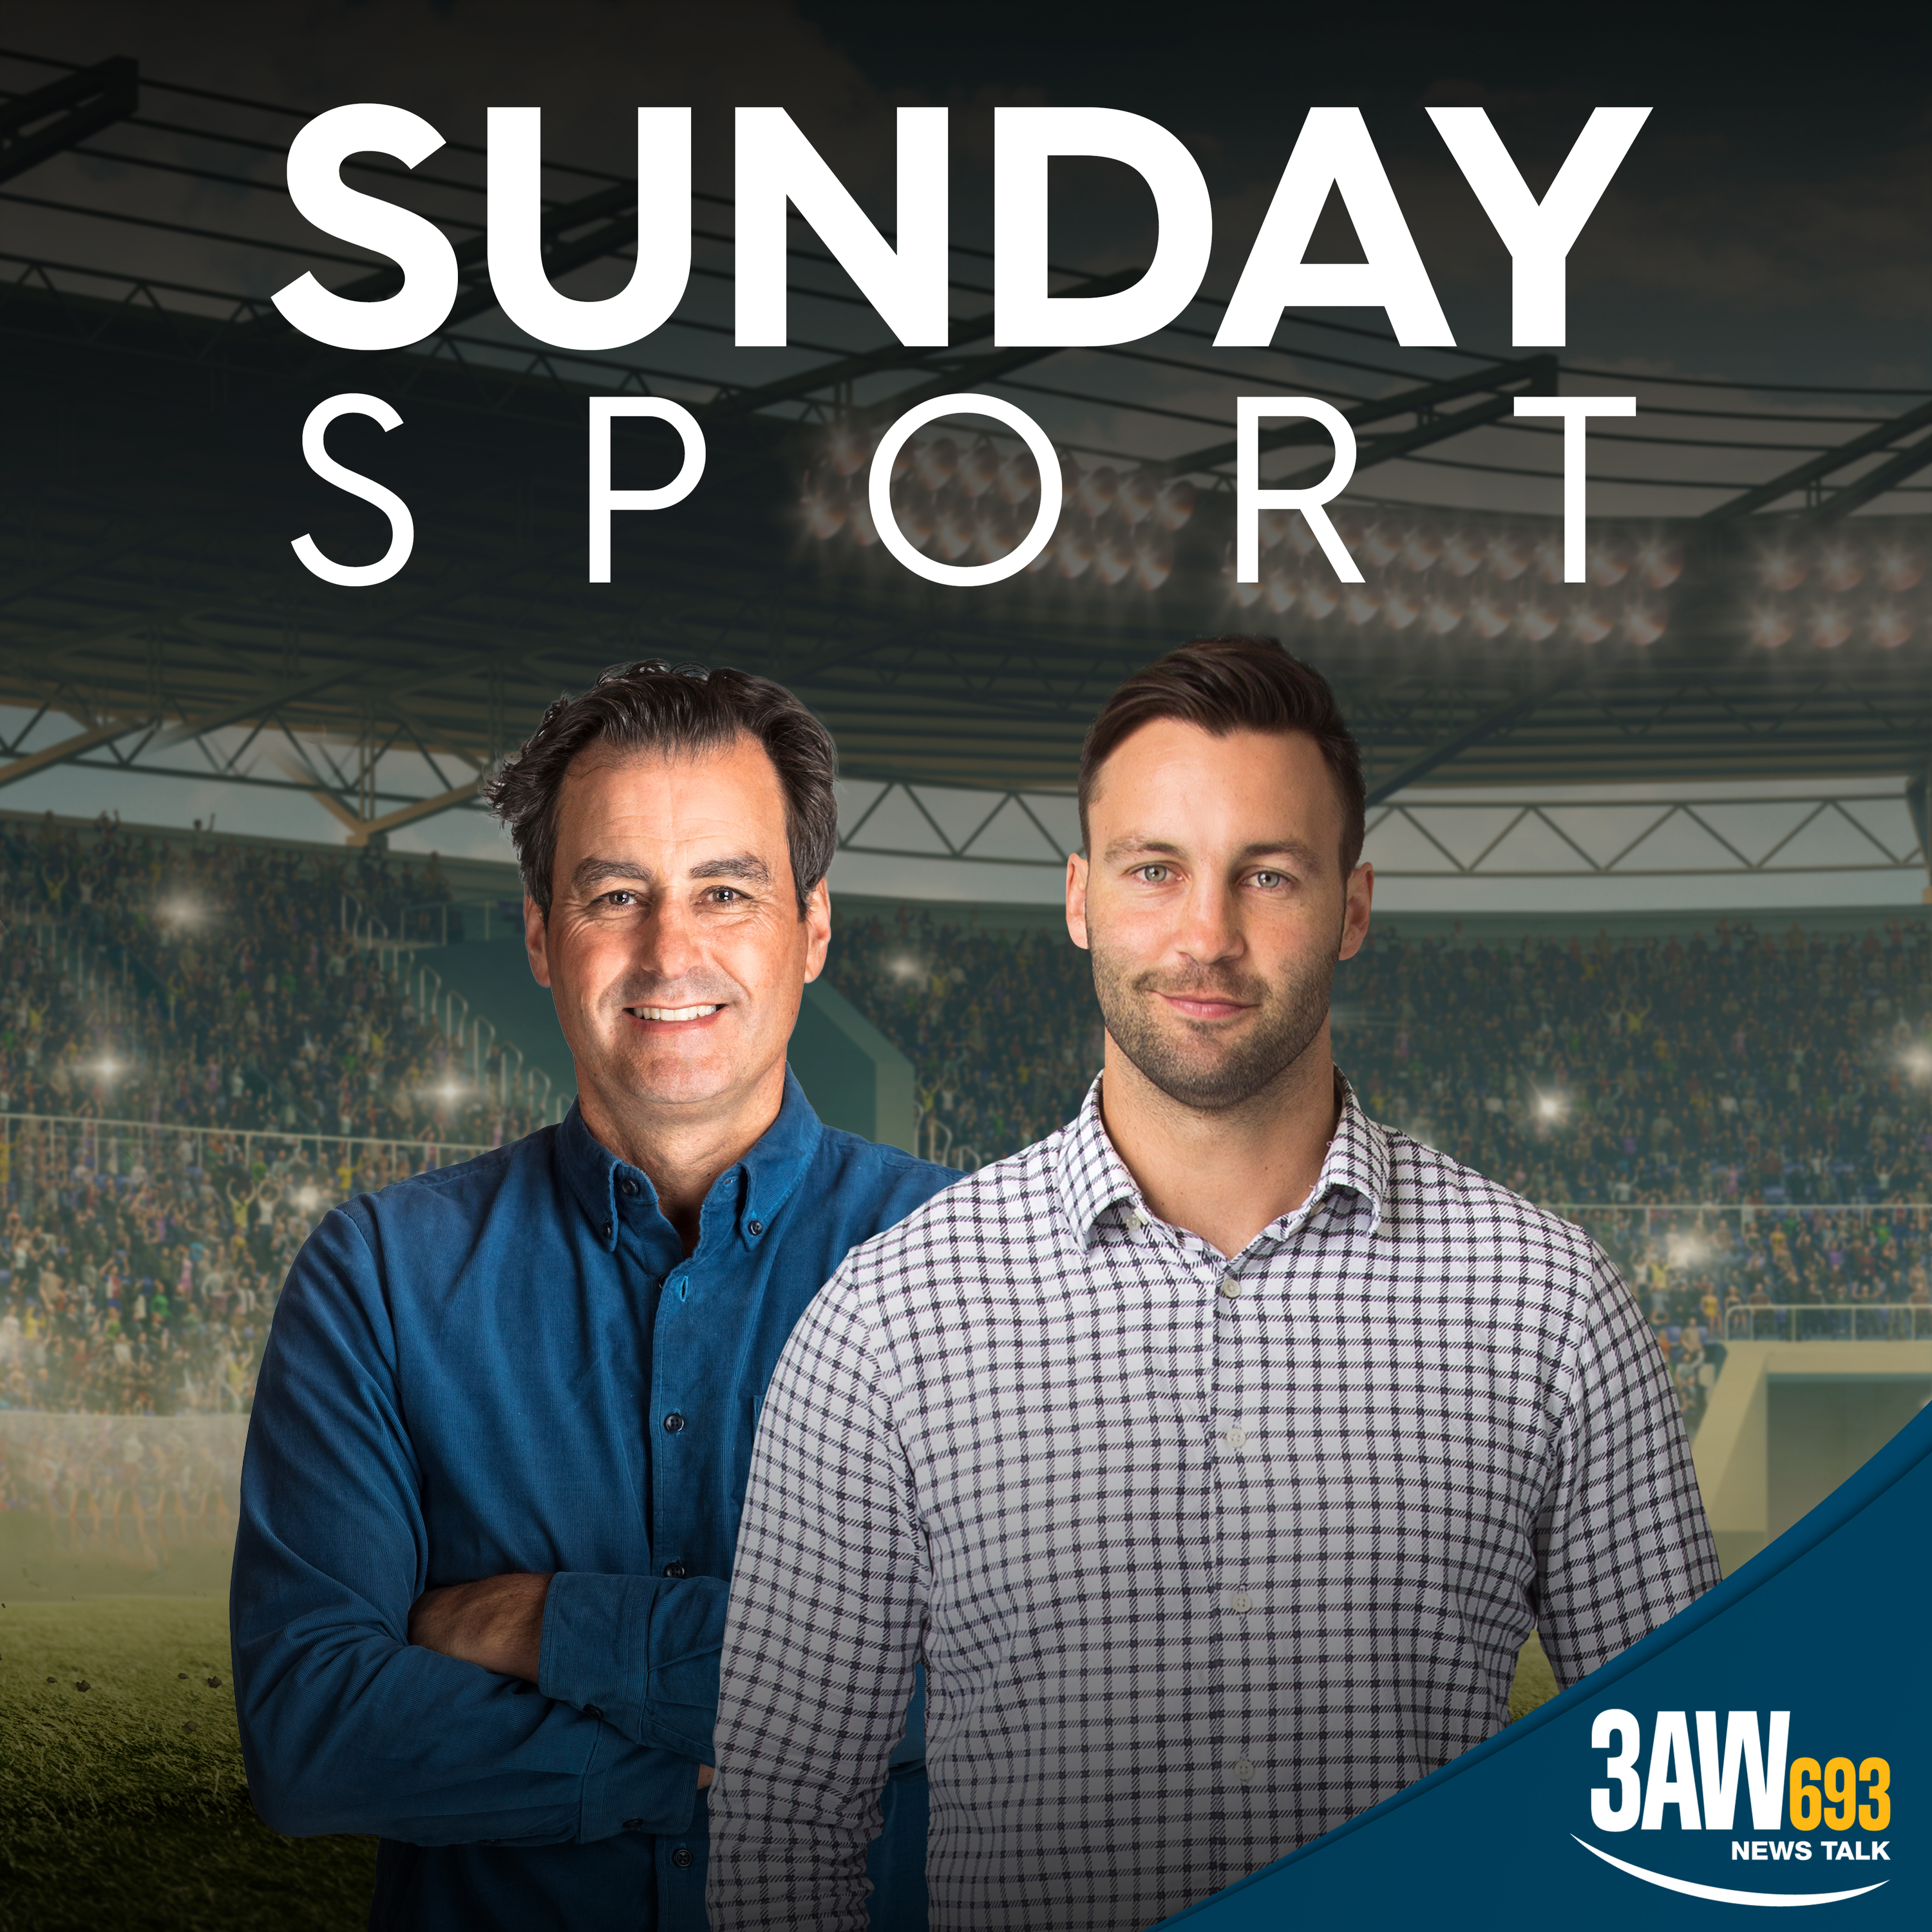 Sunday Sport with Mark Allen, Jimmy Bartel and Jacqui Reed: Sunday, Jul 17